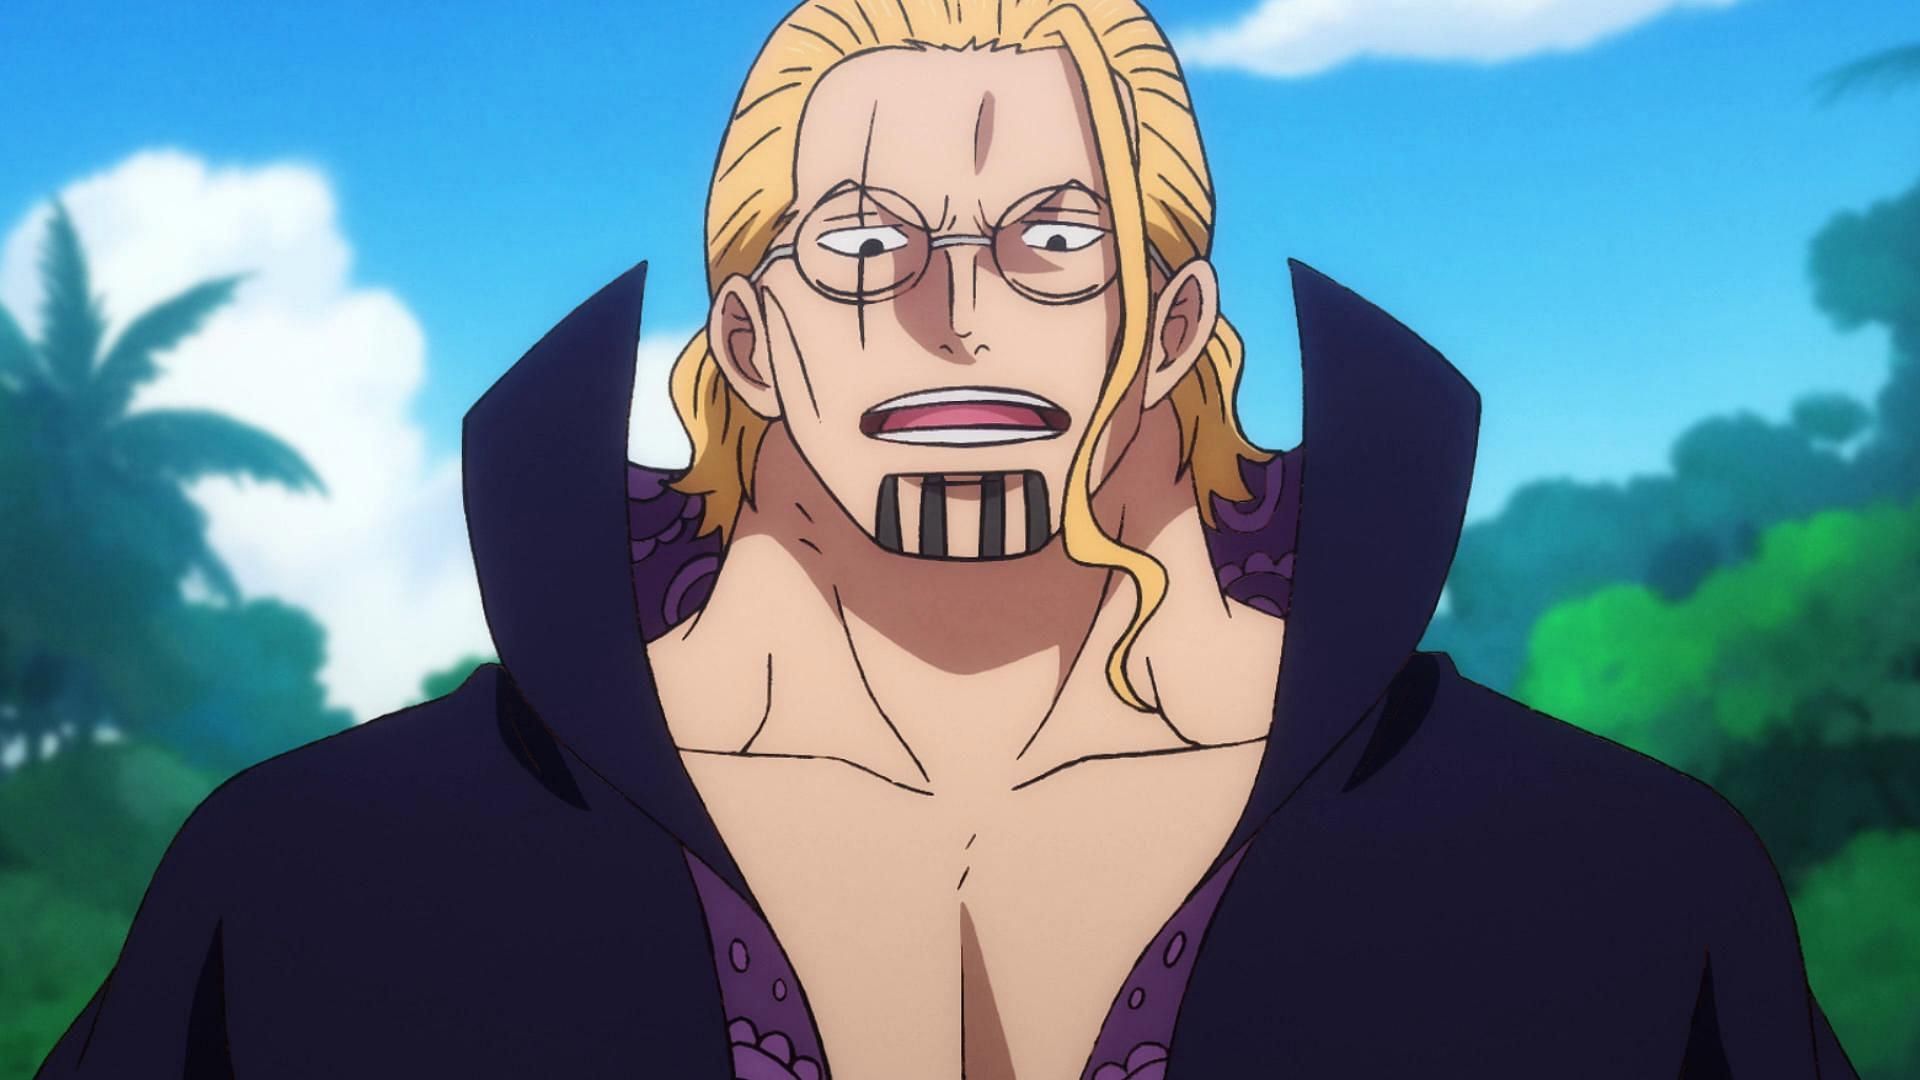 Rayleigh in his prime days (Image via Toei Animation, One Piece)